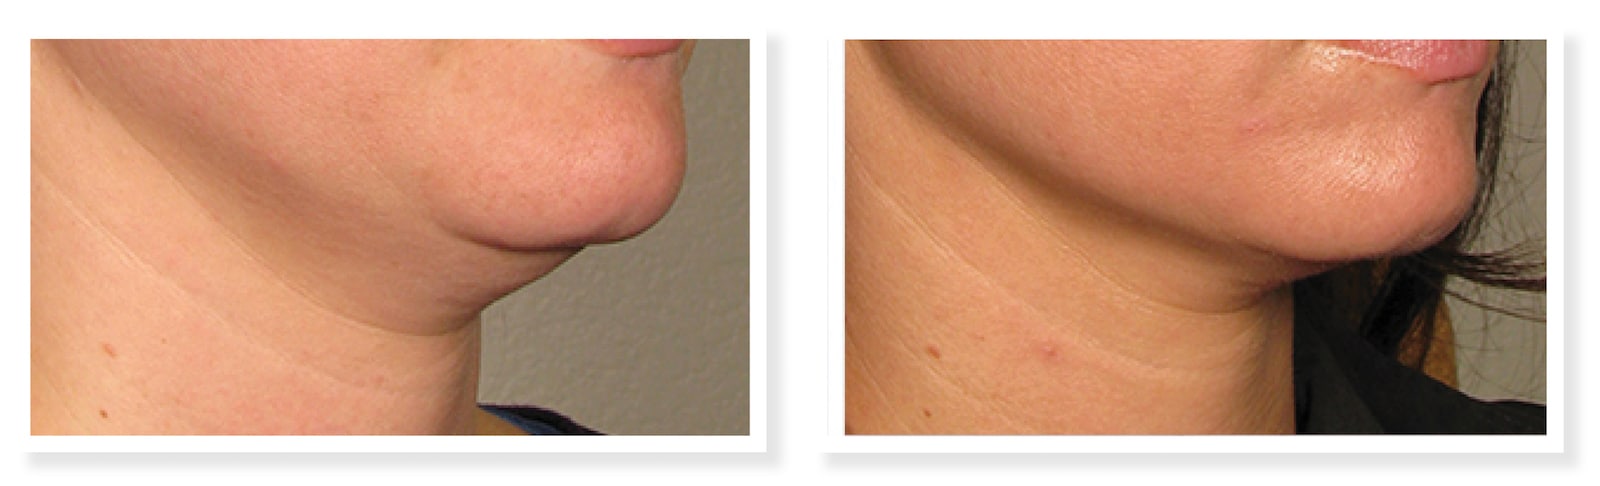 Project Skin Vancouver Ultherapy Before After Neck